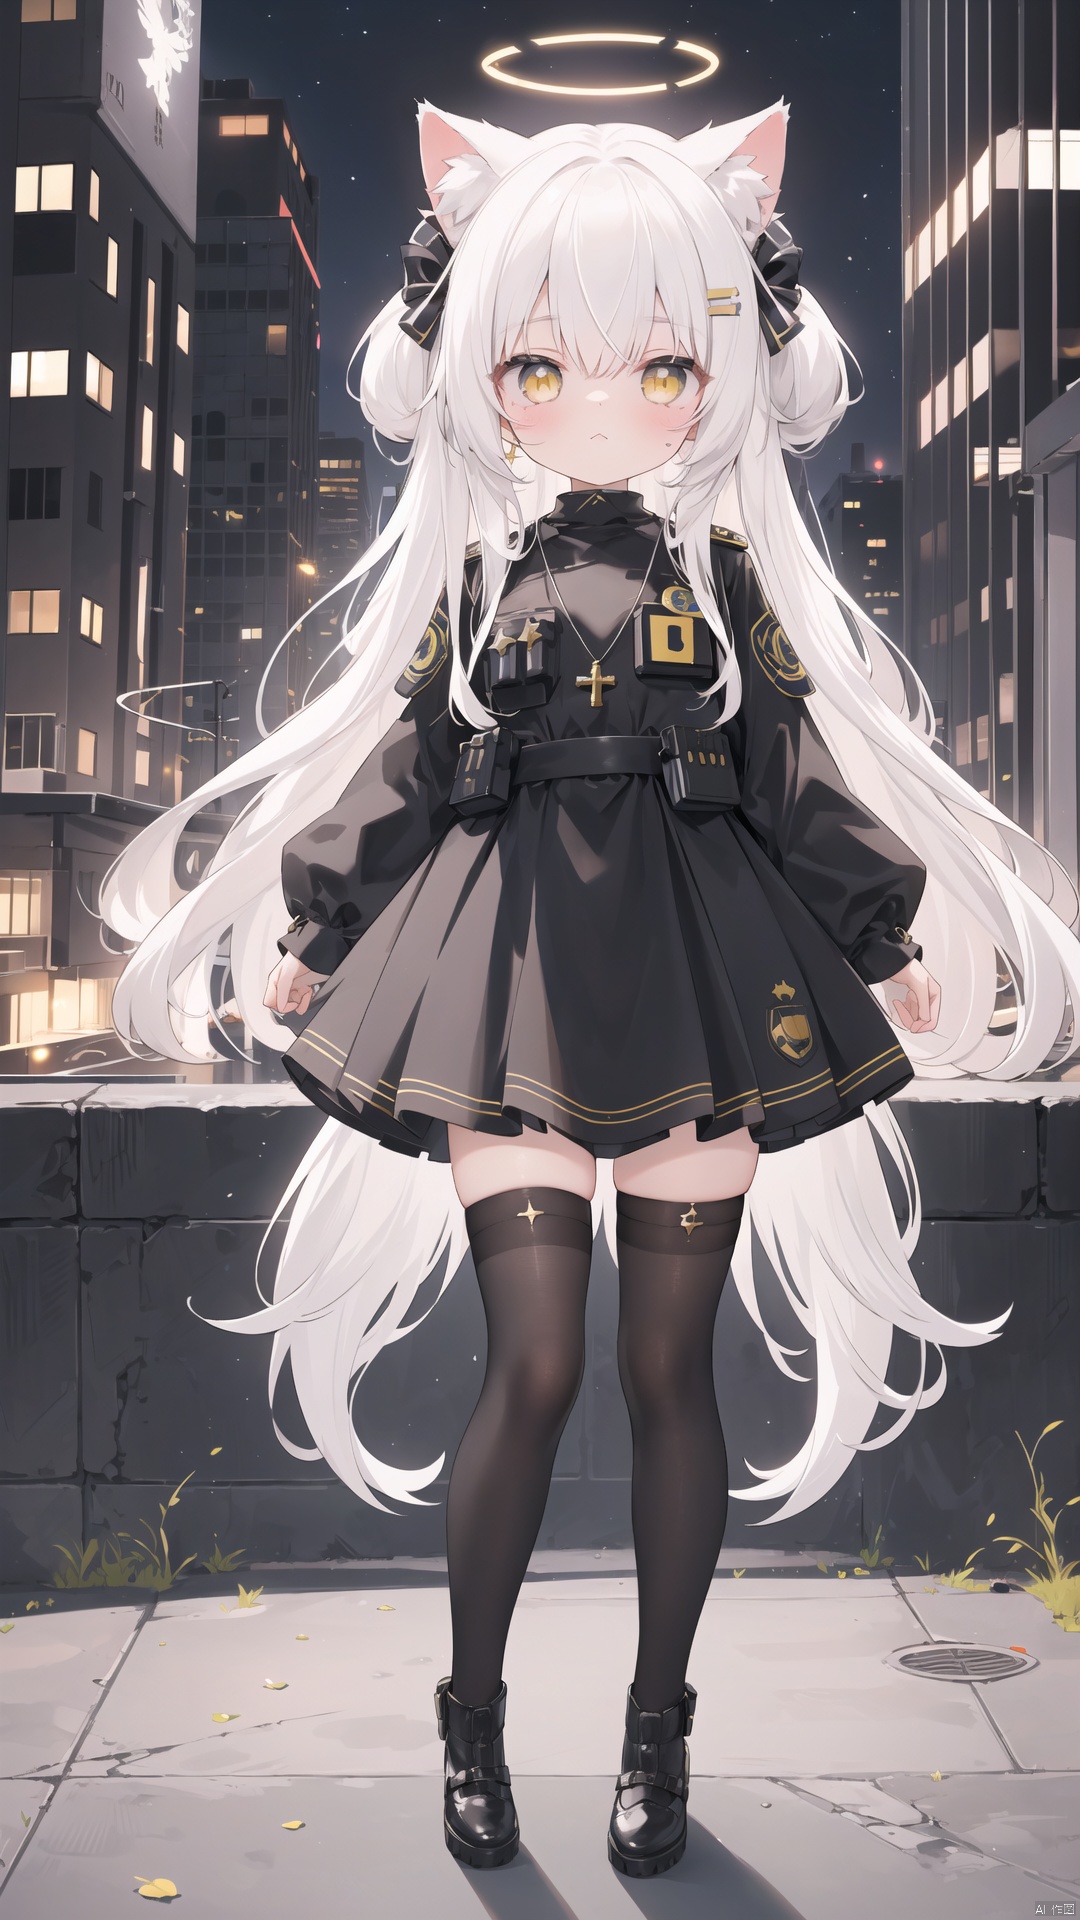  white hair,yellow eyes,looking up,stockings,long hair,hime cut,messy hair,floating hair,demon wings,halo,cross necklace,holy,divinity,shine,holy light,cat girl,(loli),(petite),solo,1girl,Beautiful,standing,looking at viewer,(black police uniform:1.5),at night,city background
